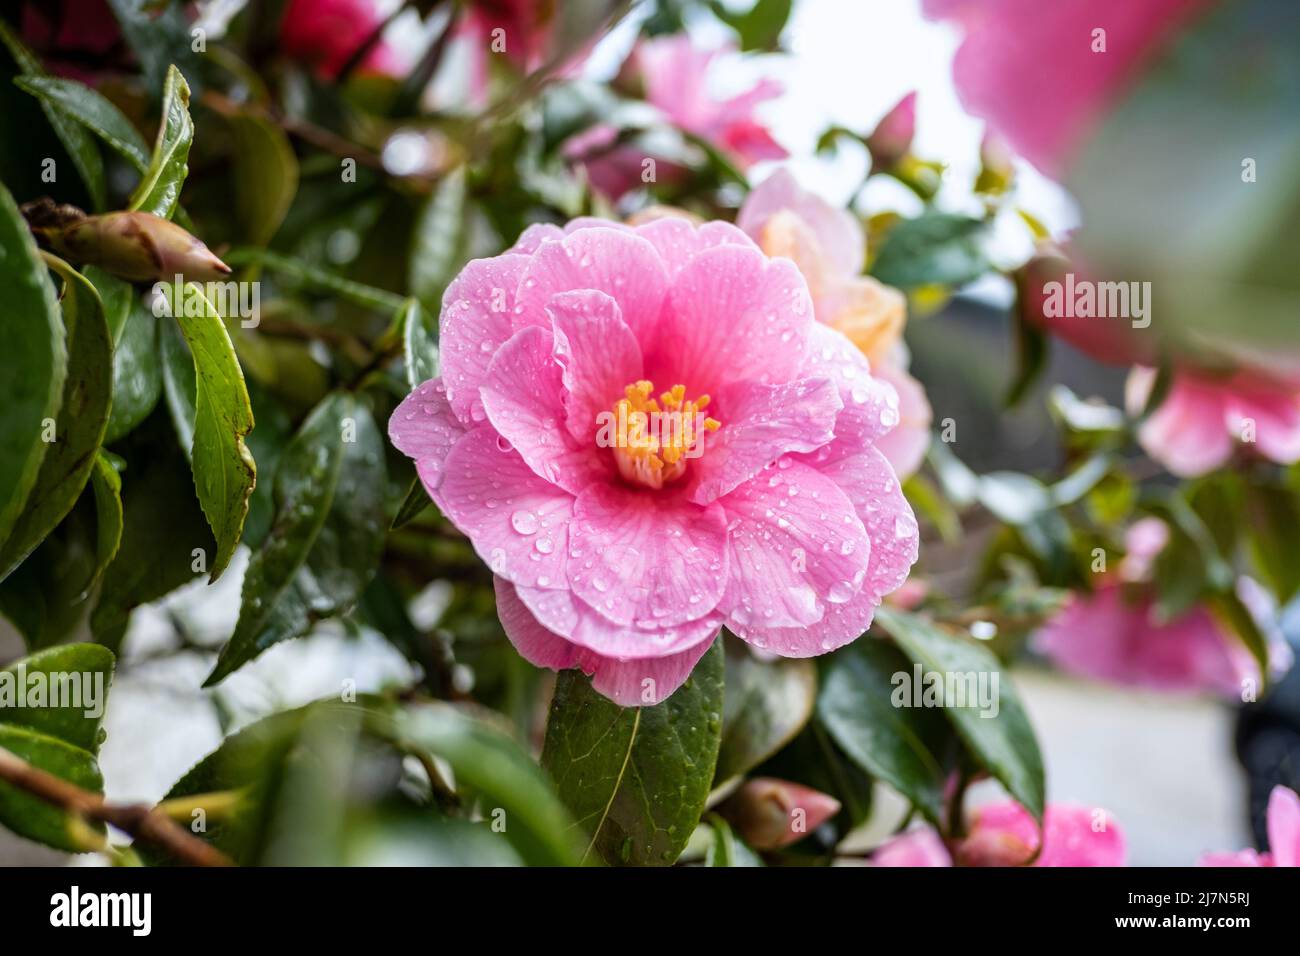 Camellia x williamsii, beautiful hybrid camellia flower with fresh waxy leaves, lightly variegated pink petals, yellow stamens and water droplets Stock Photo